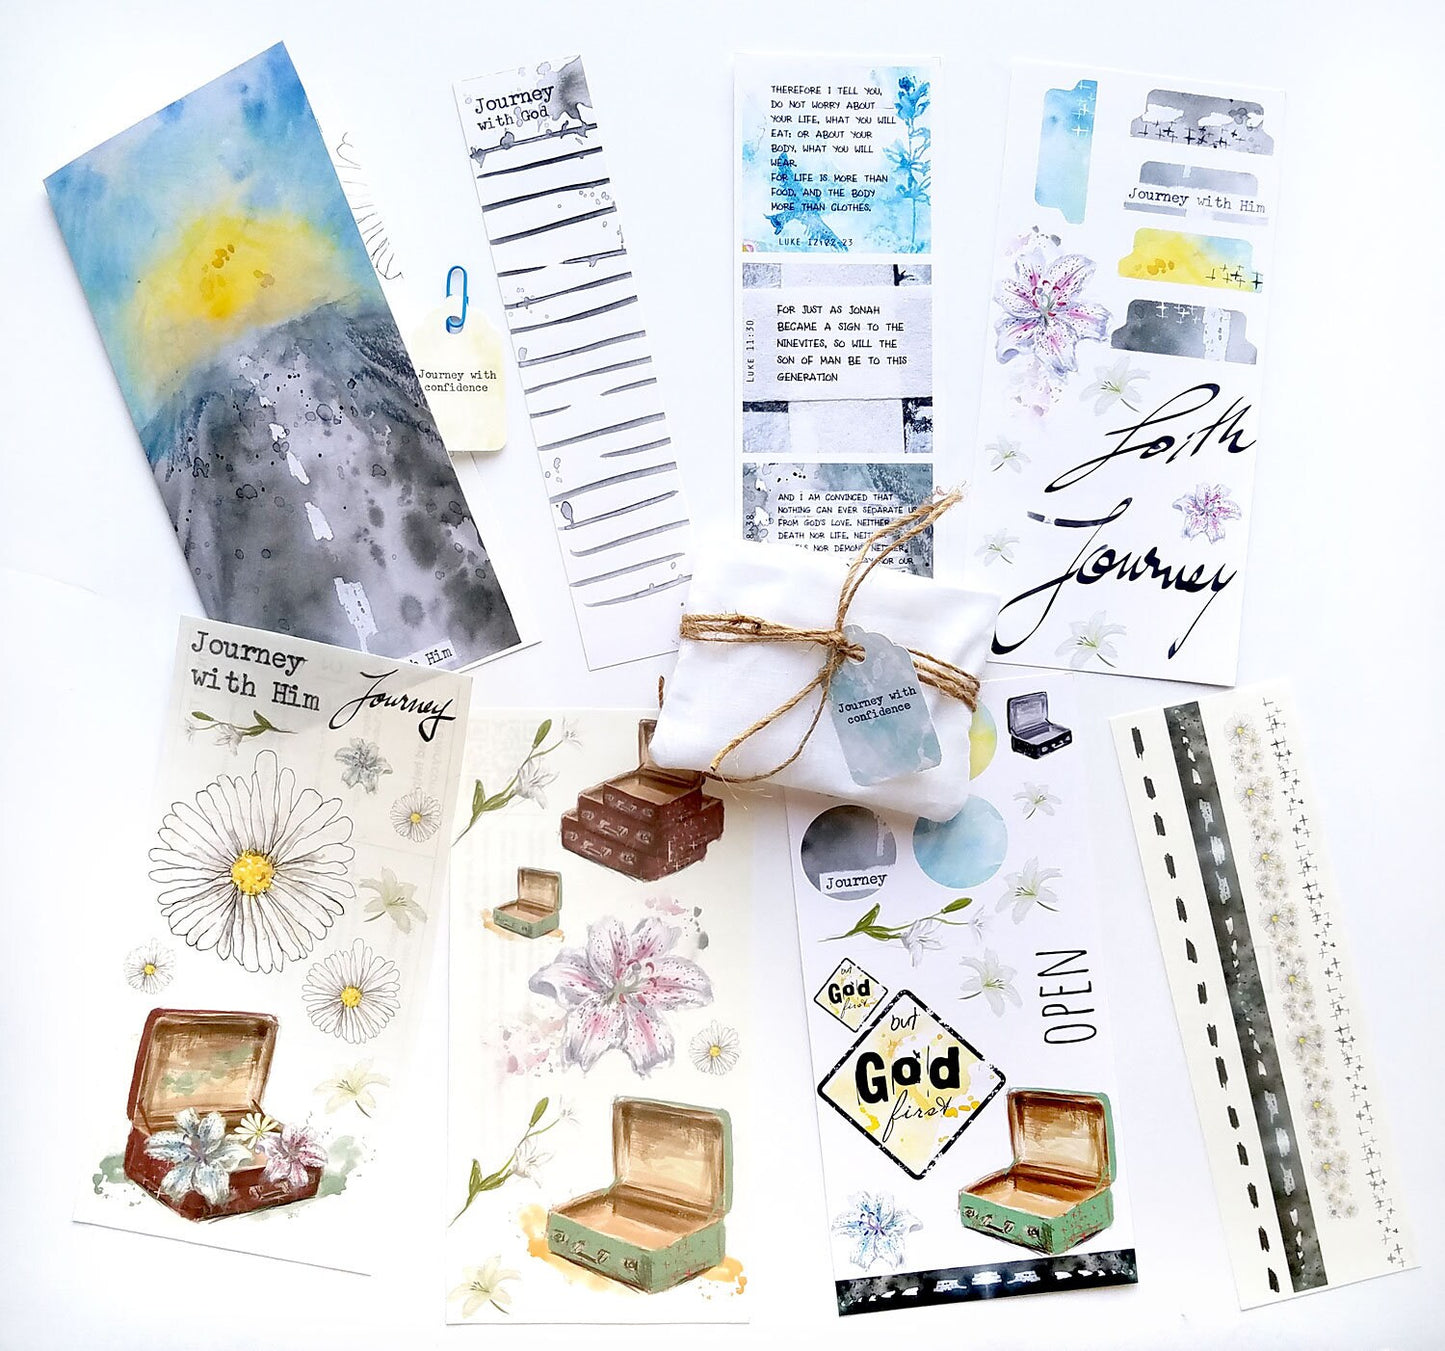 Journey with confidence - a Bible journaling creative devotional kit